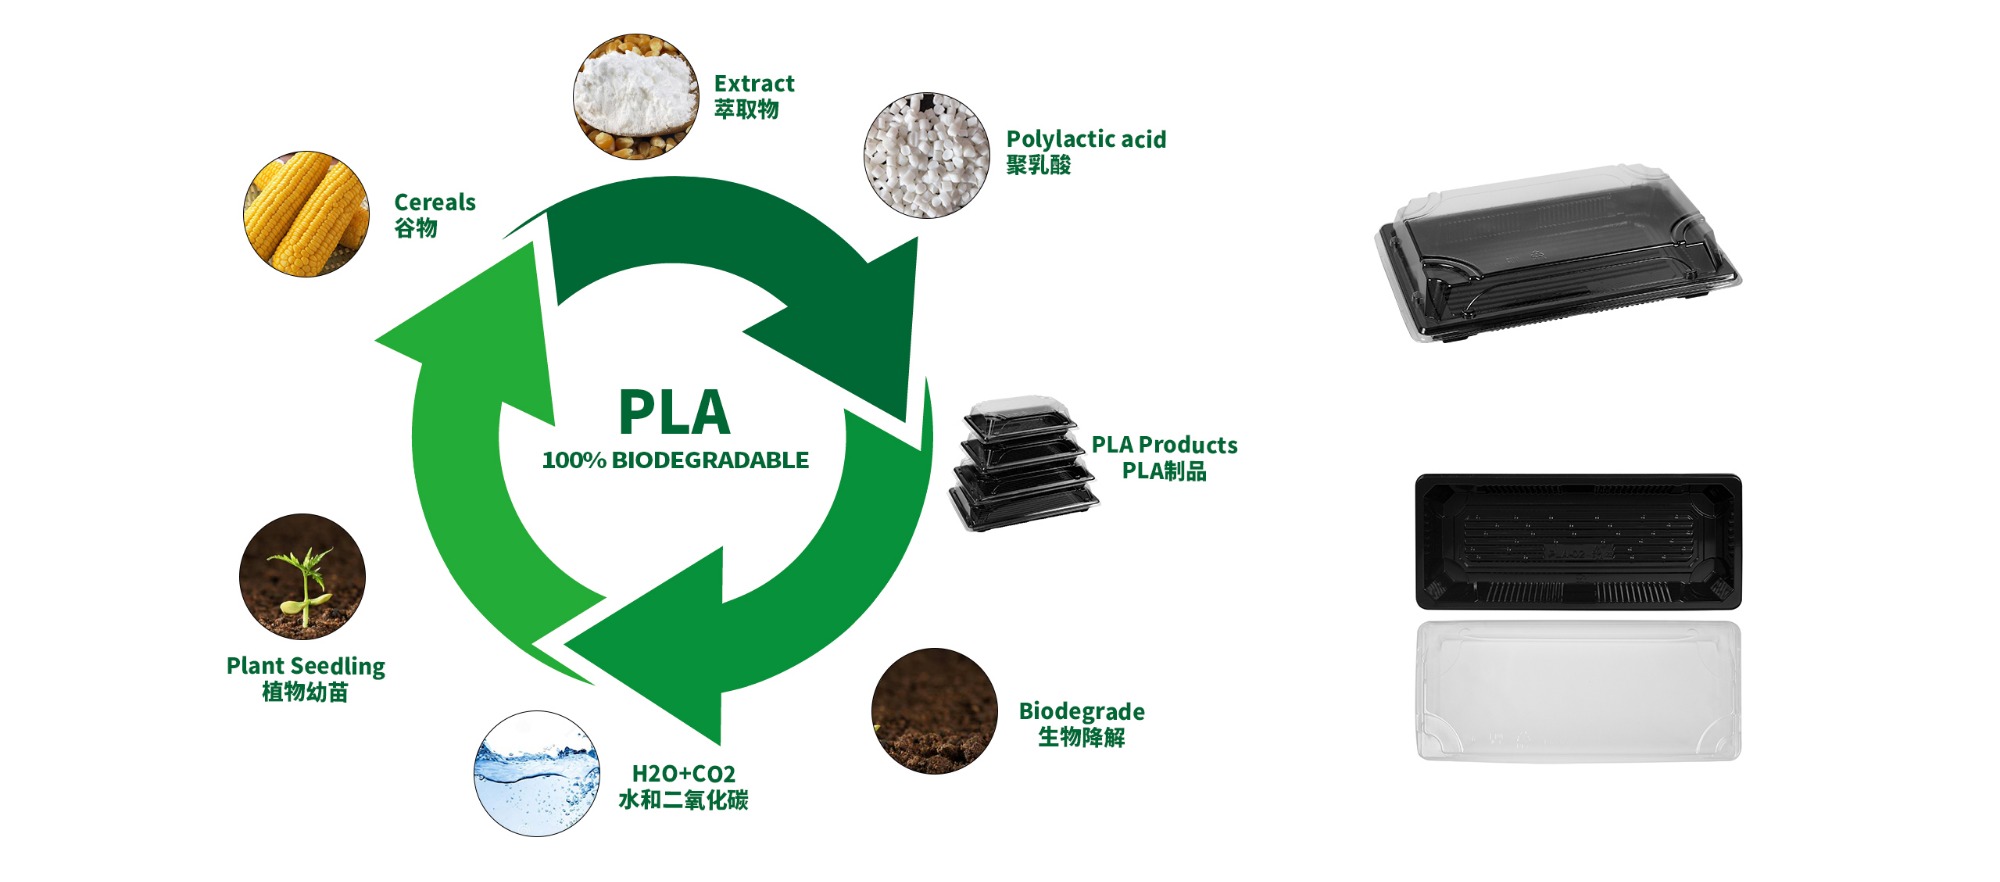 PLA is made of cornstarch extract, which can be decomposed and reused. The production of the process can reduce the electrictity consumption and carbon dioxide emission